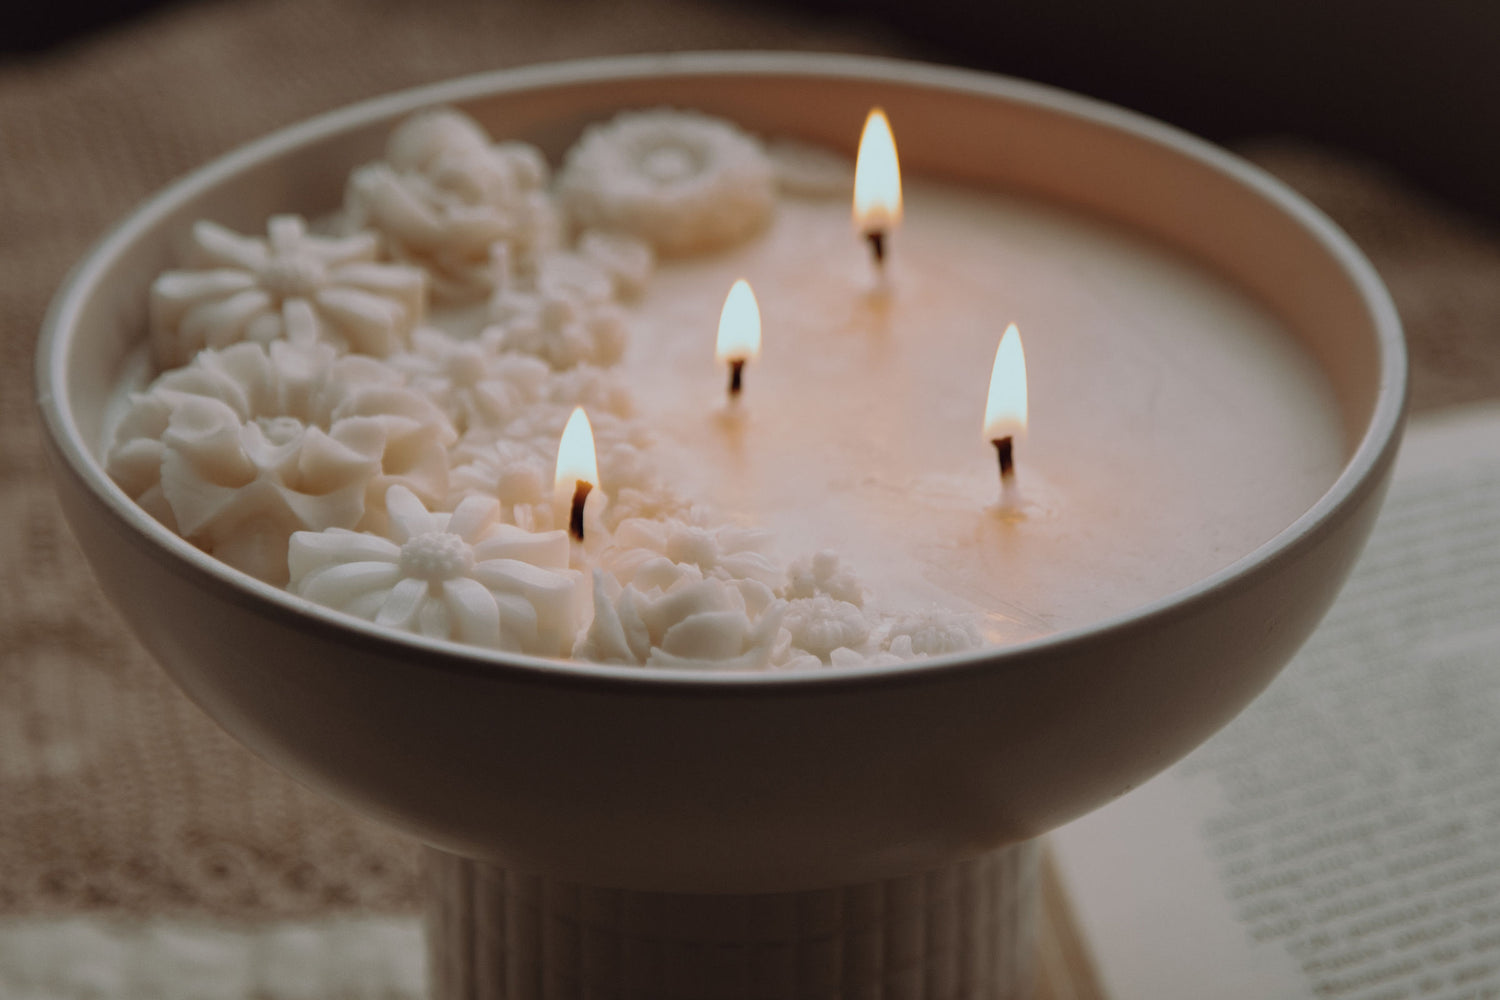 Container Candles